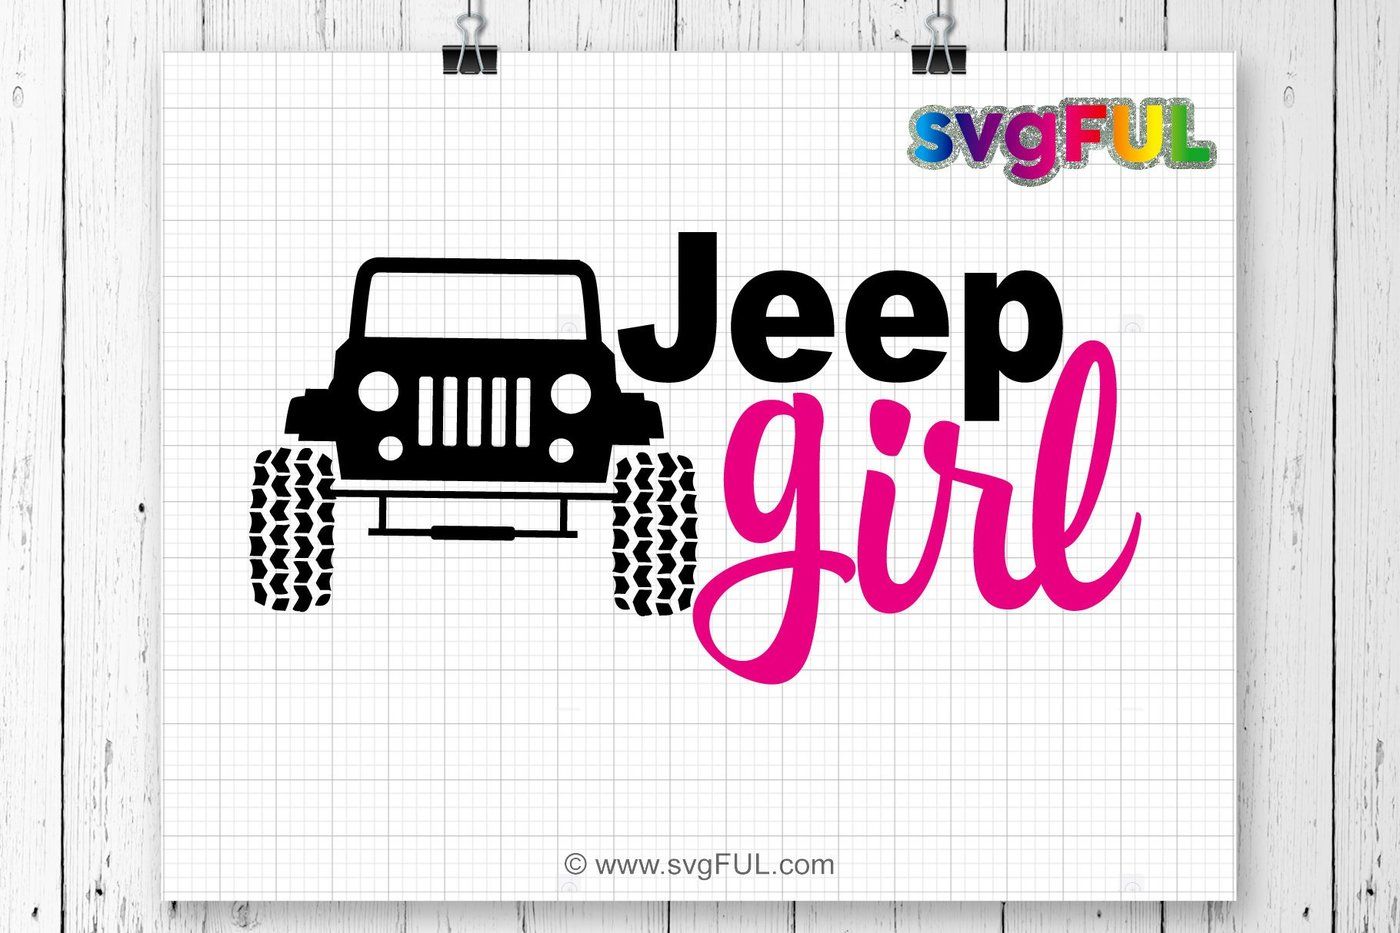 Download Jeep Girl Svg, Jeep Svg, SVG Files, Cricut Cut Files, Silhouette Cut By svgFUL | TheHungryJPEG.com